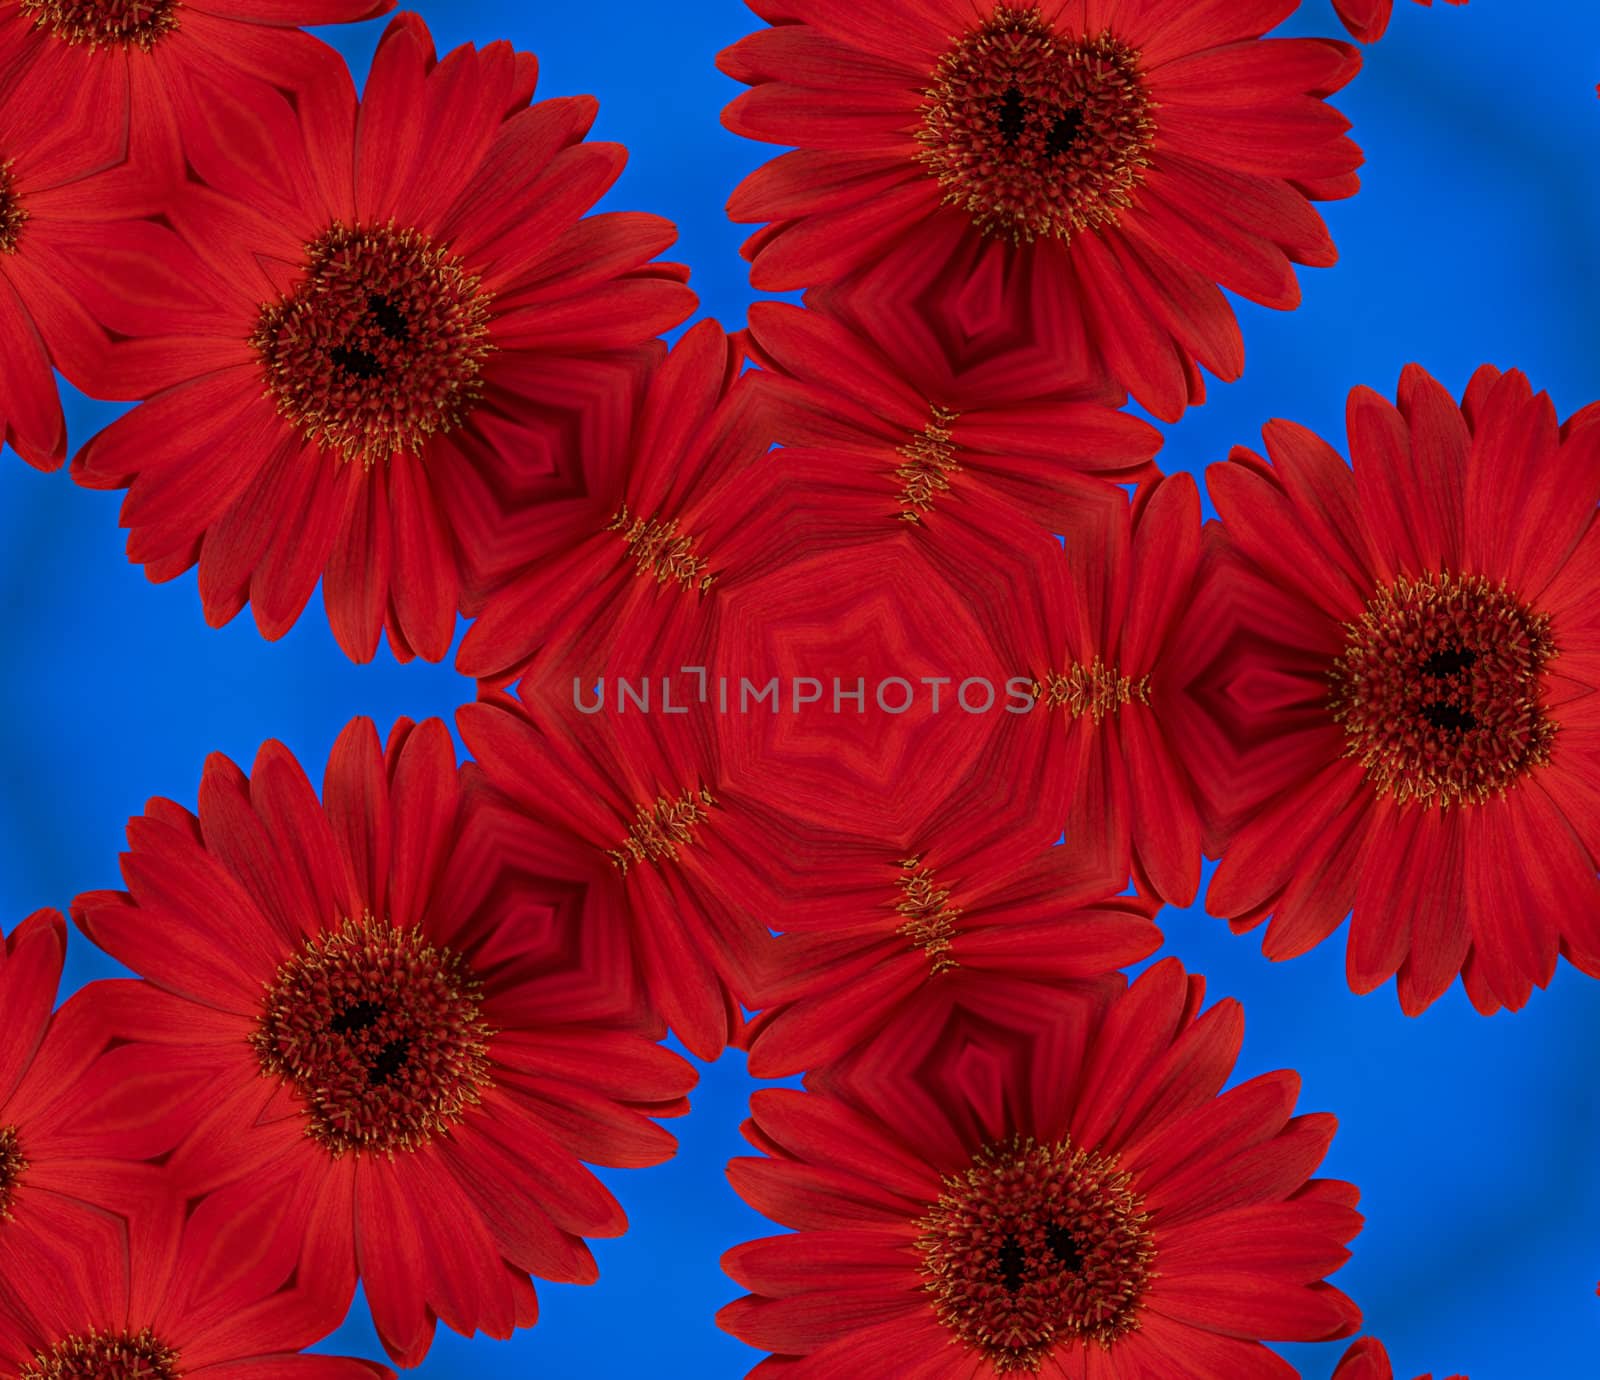 A close up of a red daisy flower